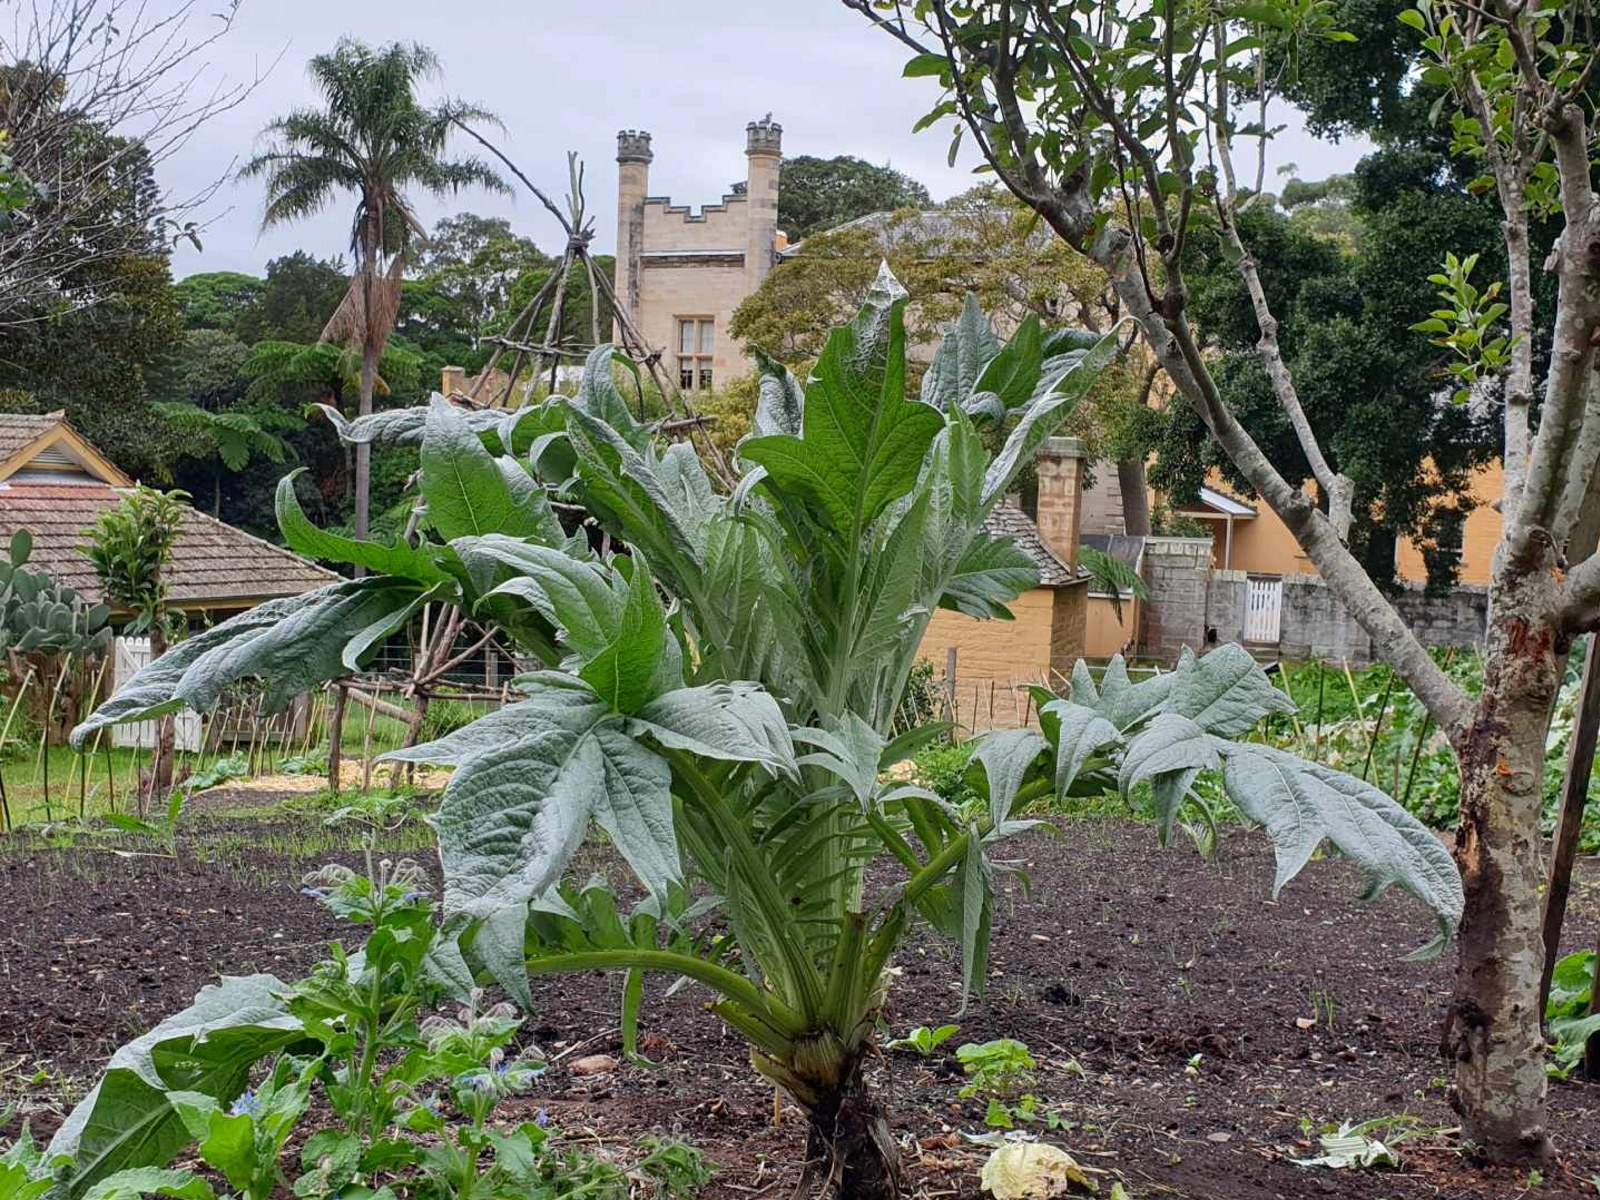 Large leafy green plant with house in background.